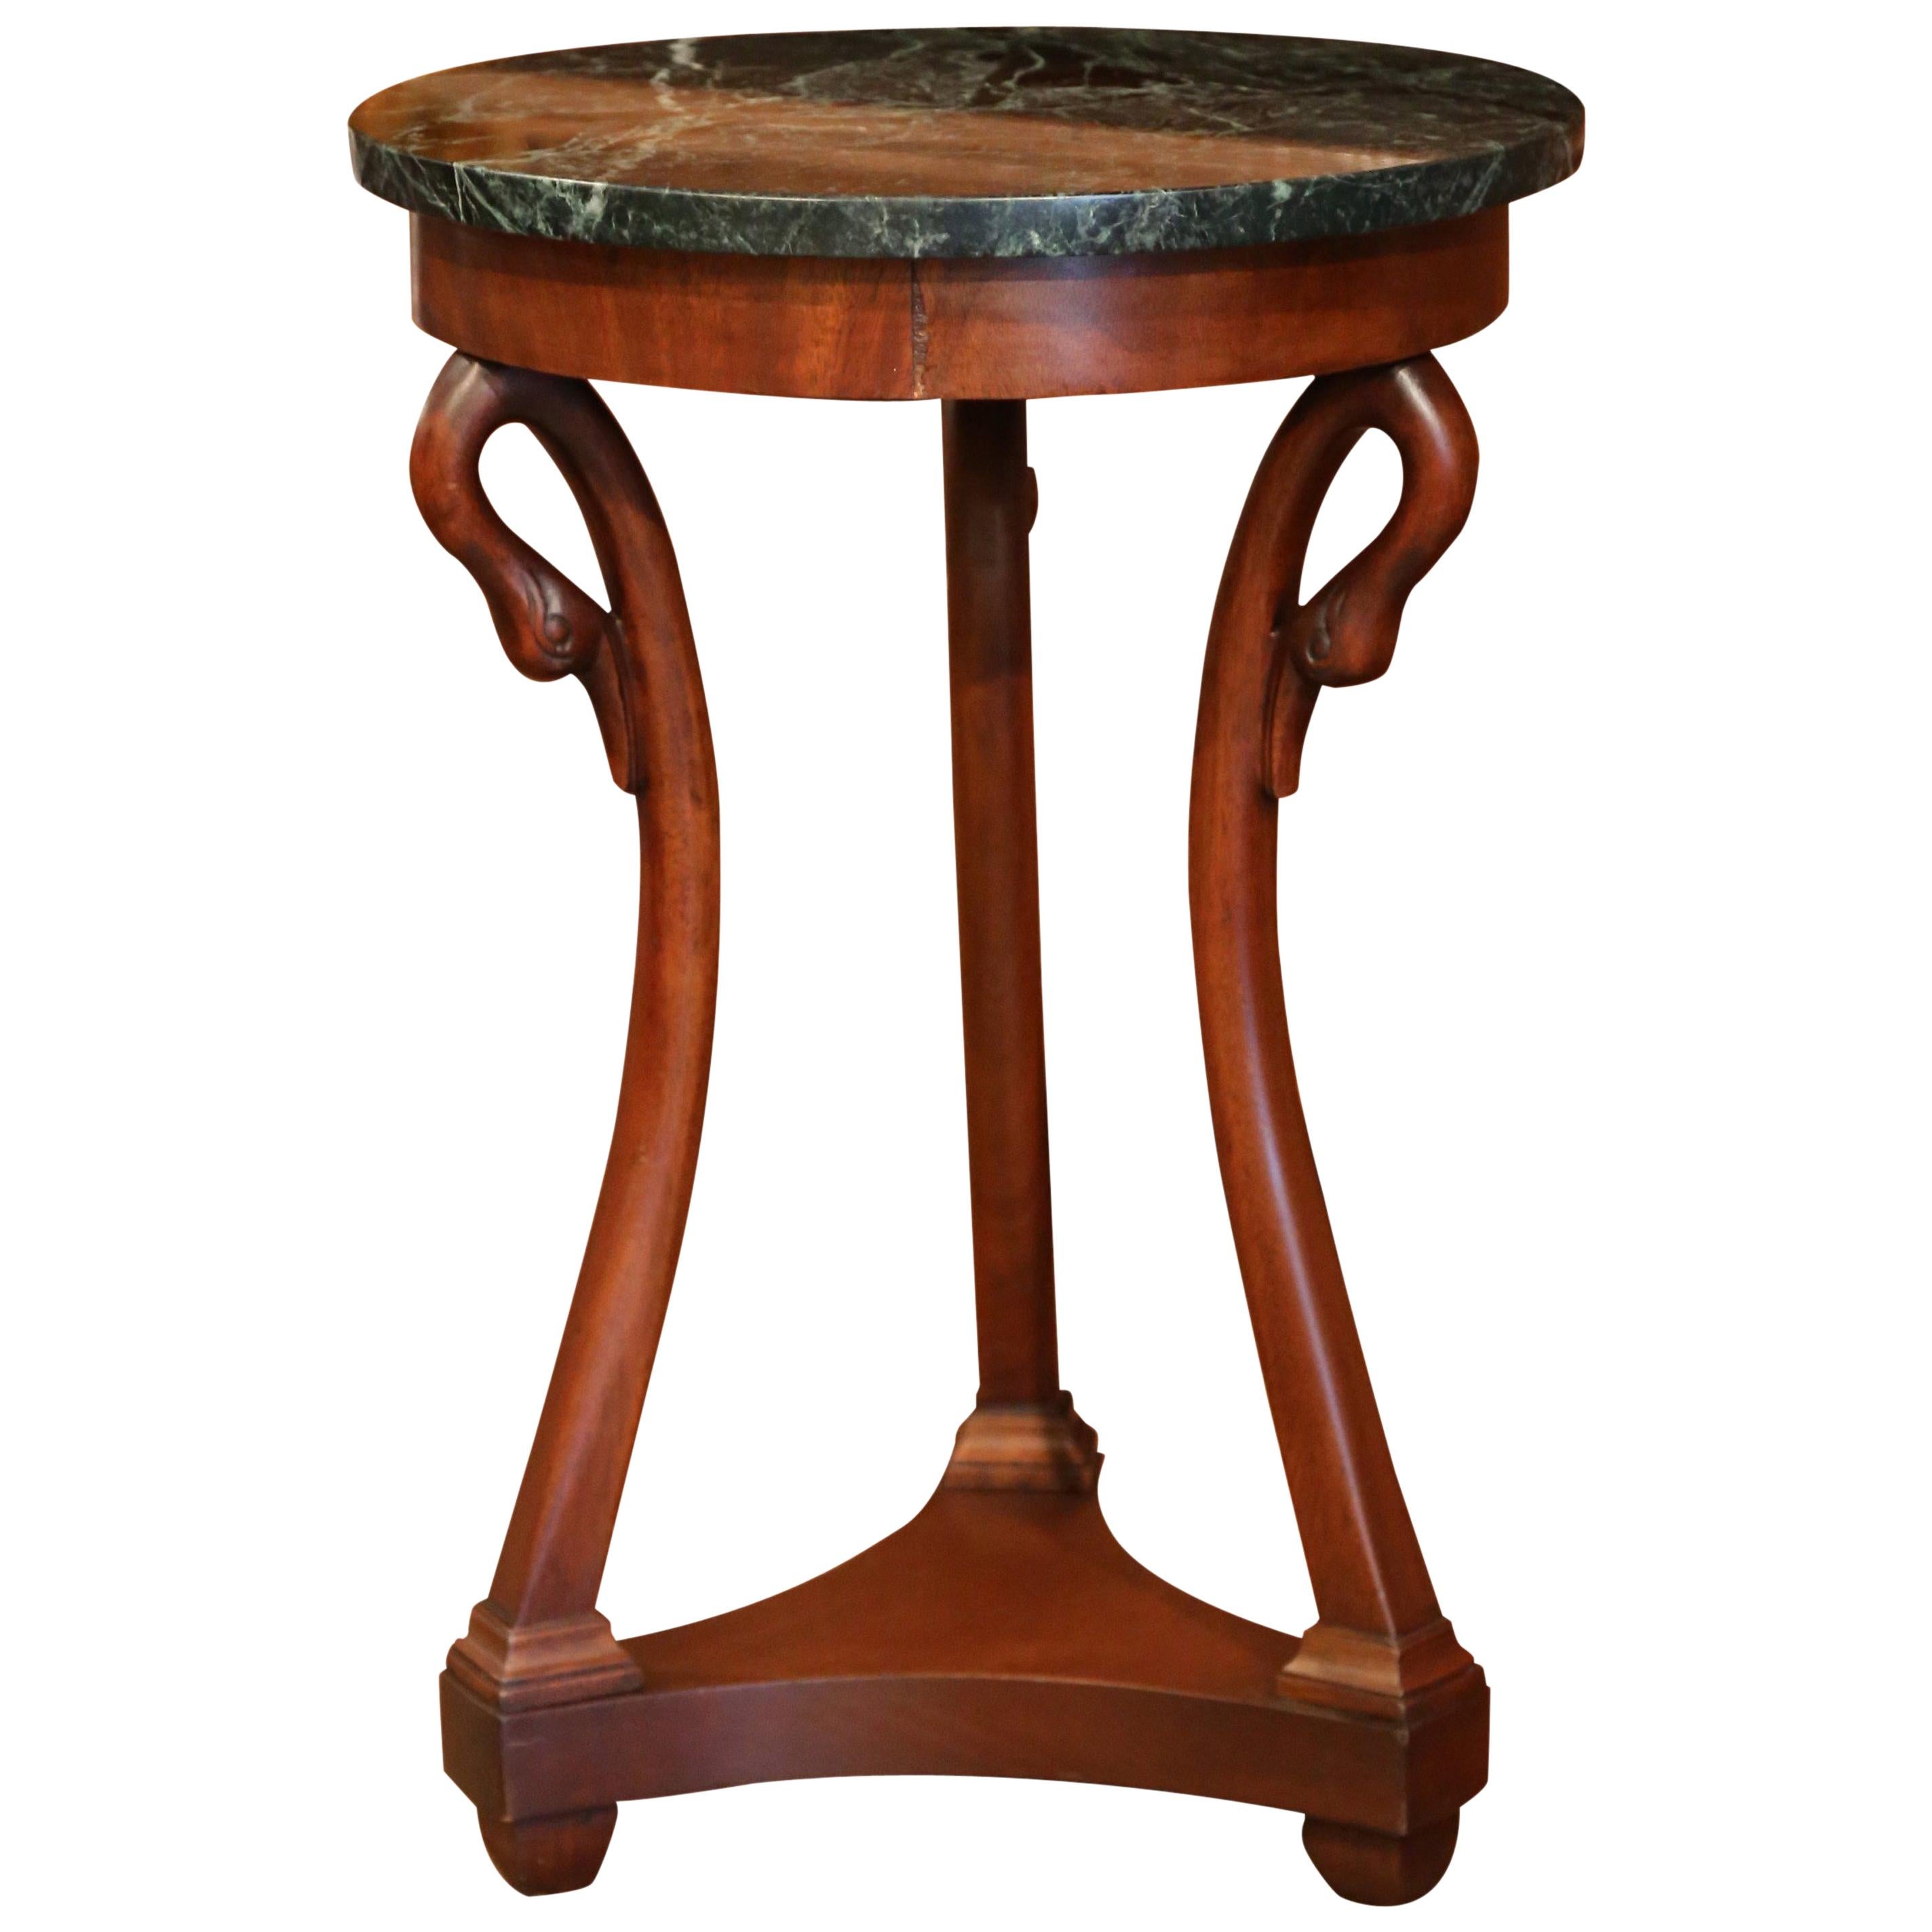 Early 20th Century French Directoire Carved Walnut Side Table with Marble Top